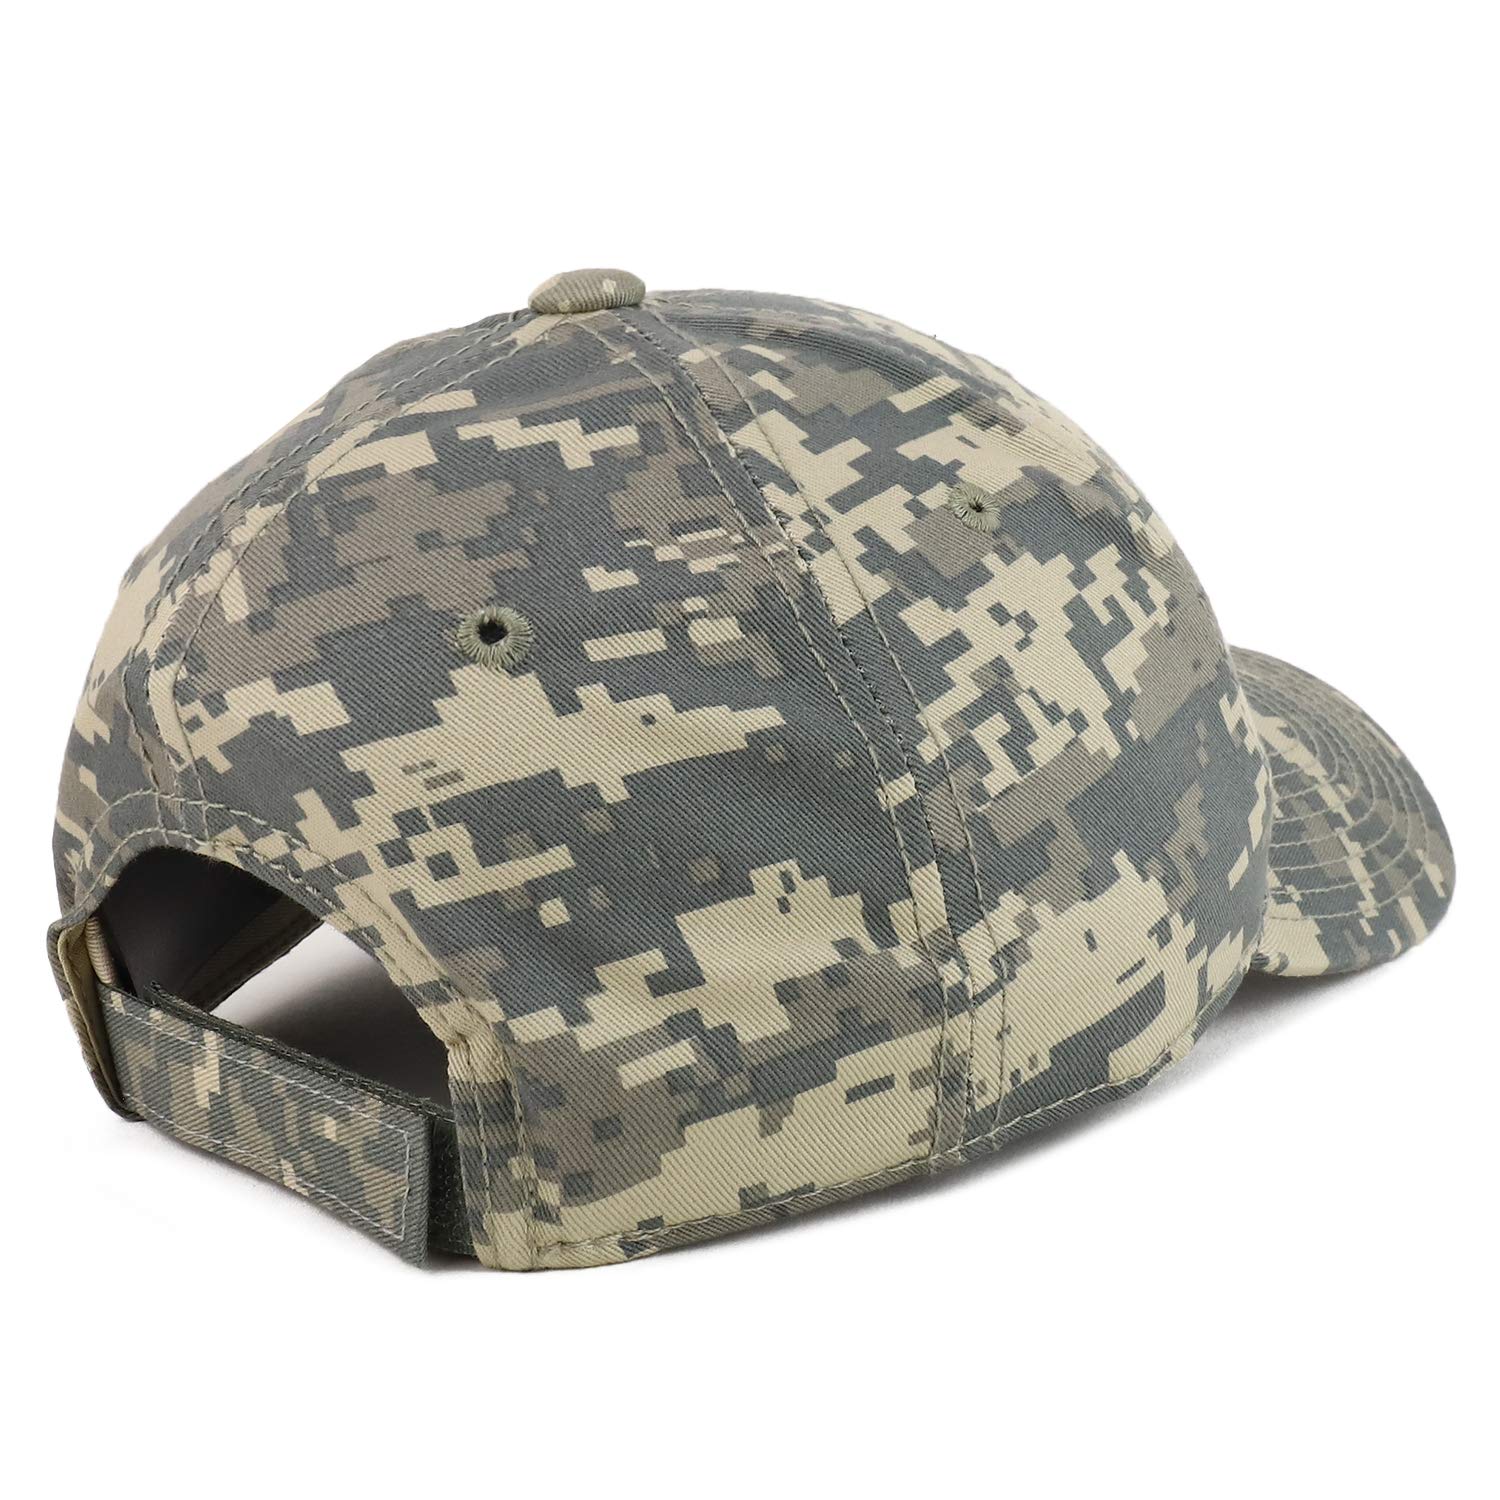 Armycrew Thin Red Line American Flag Patch Camouflage Structured Baseball Cap - ACU